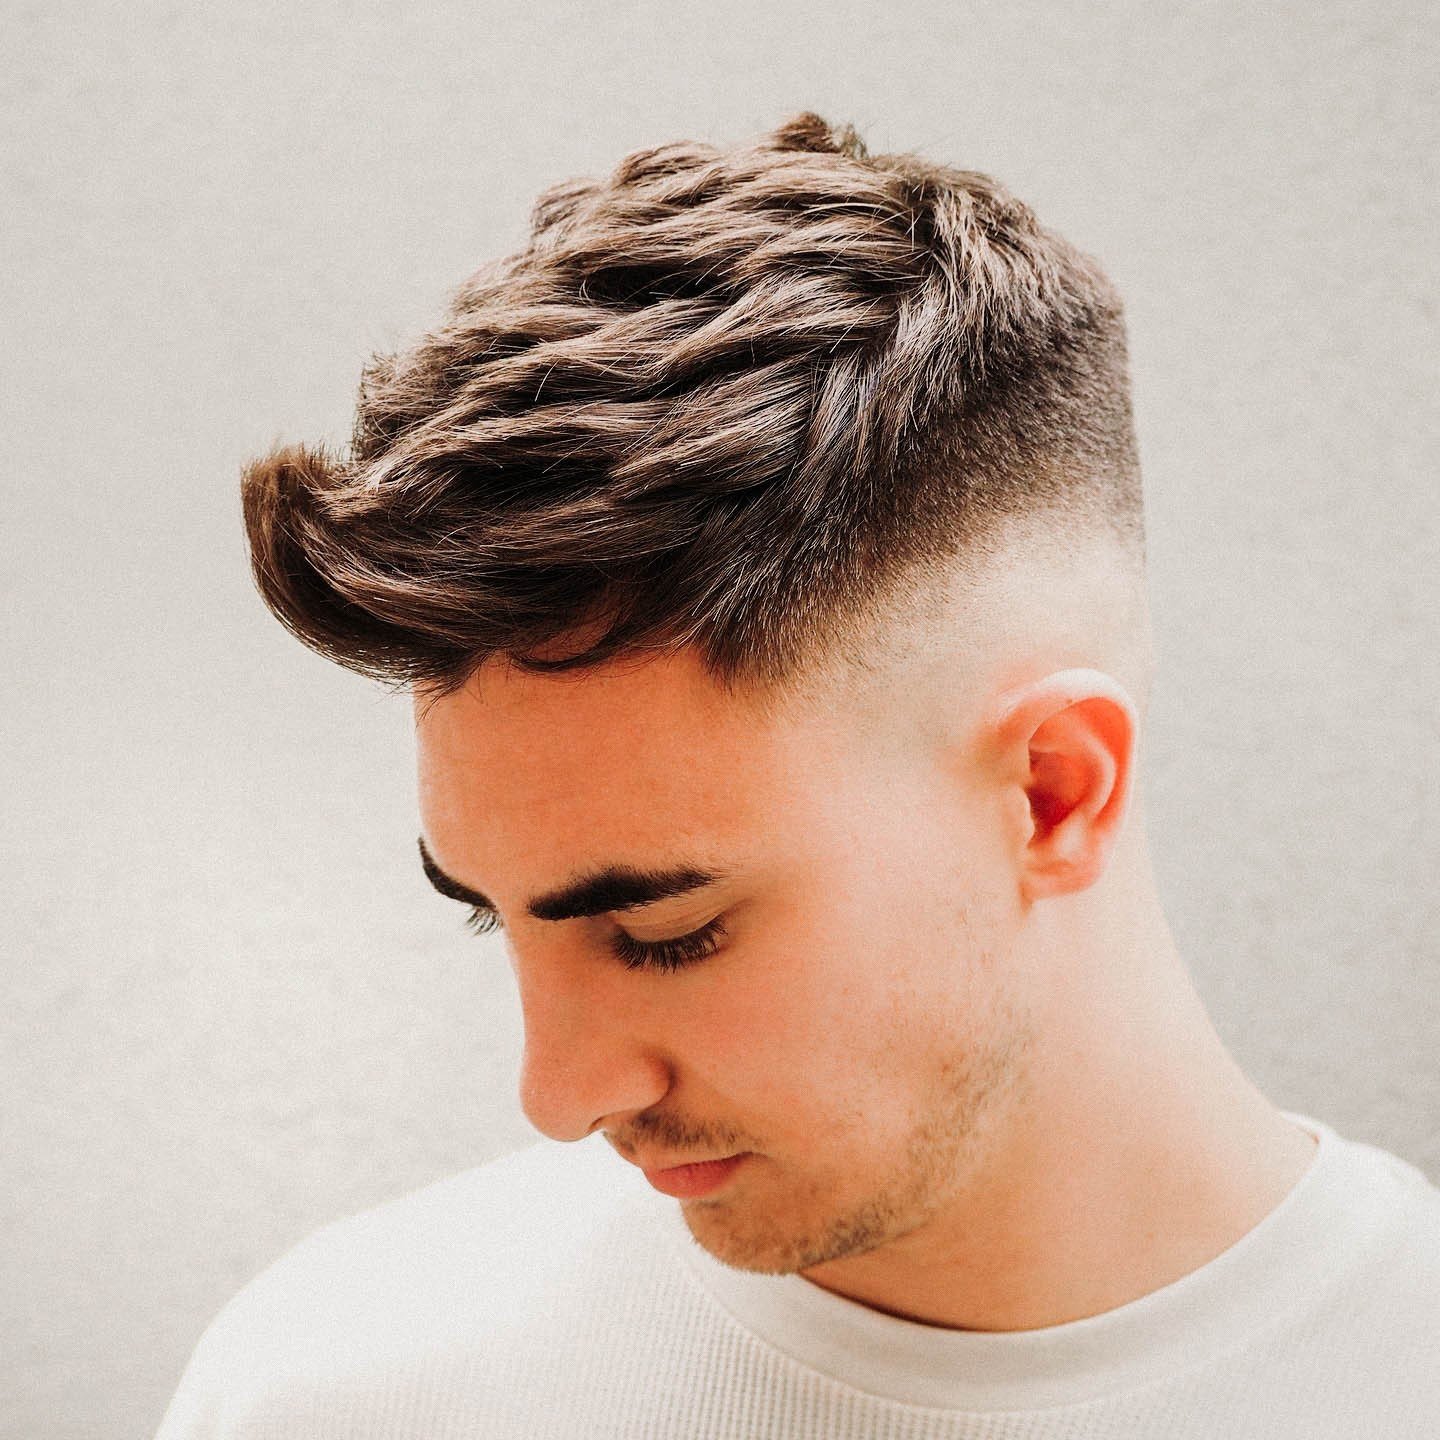 50 Classic Haircuts for Men with Oval Faces in 2022